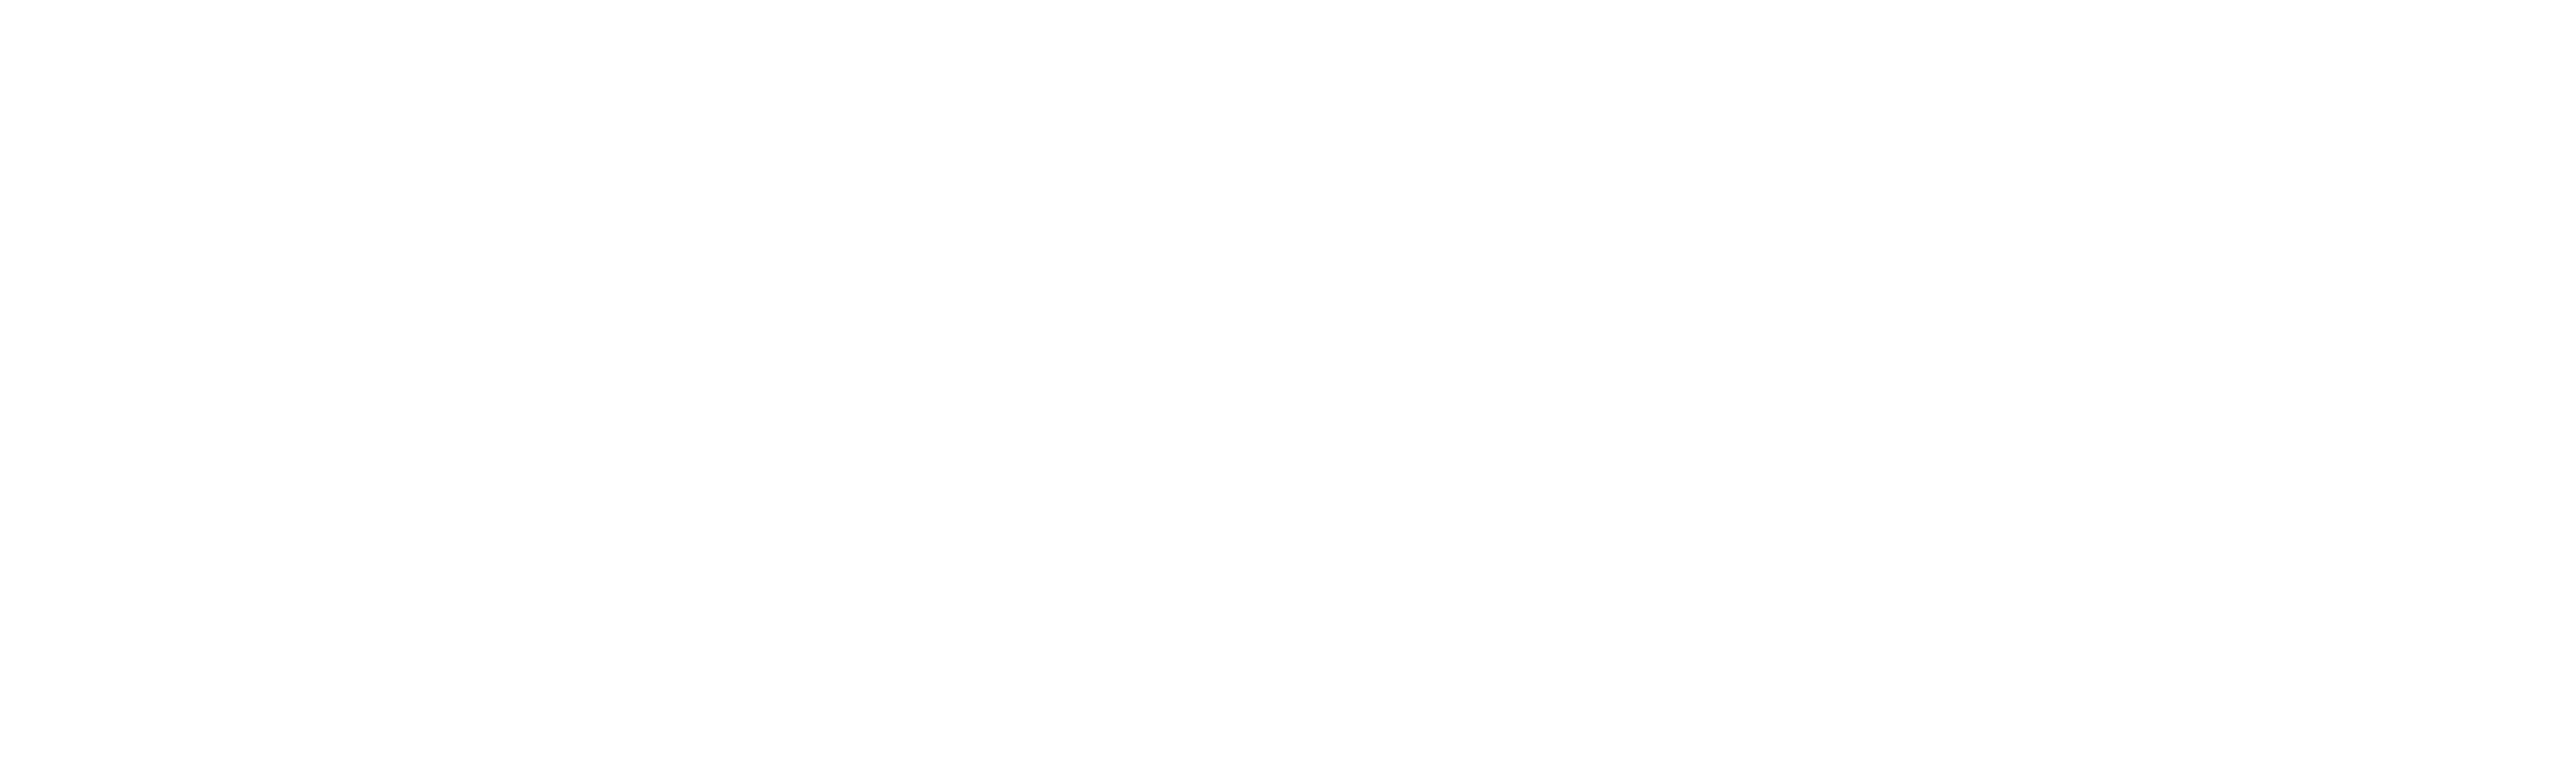 Certified-Support-Partner-White@2x